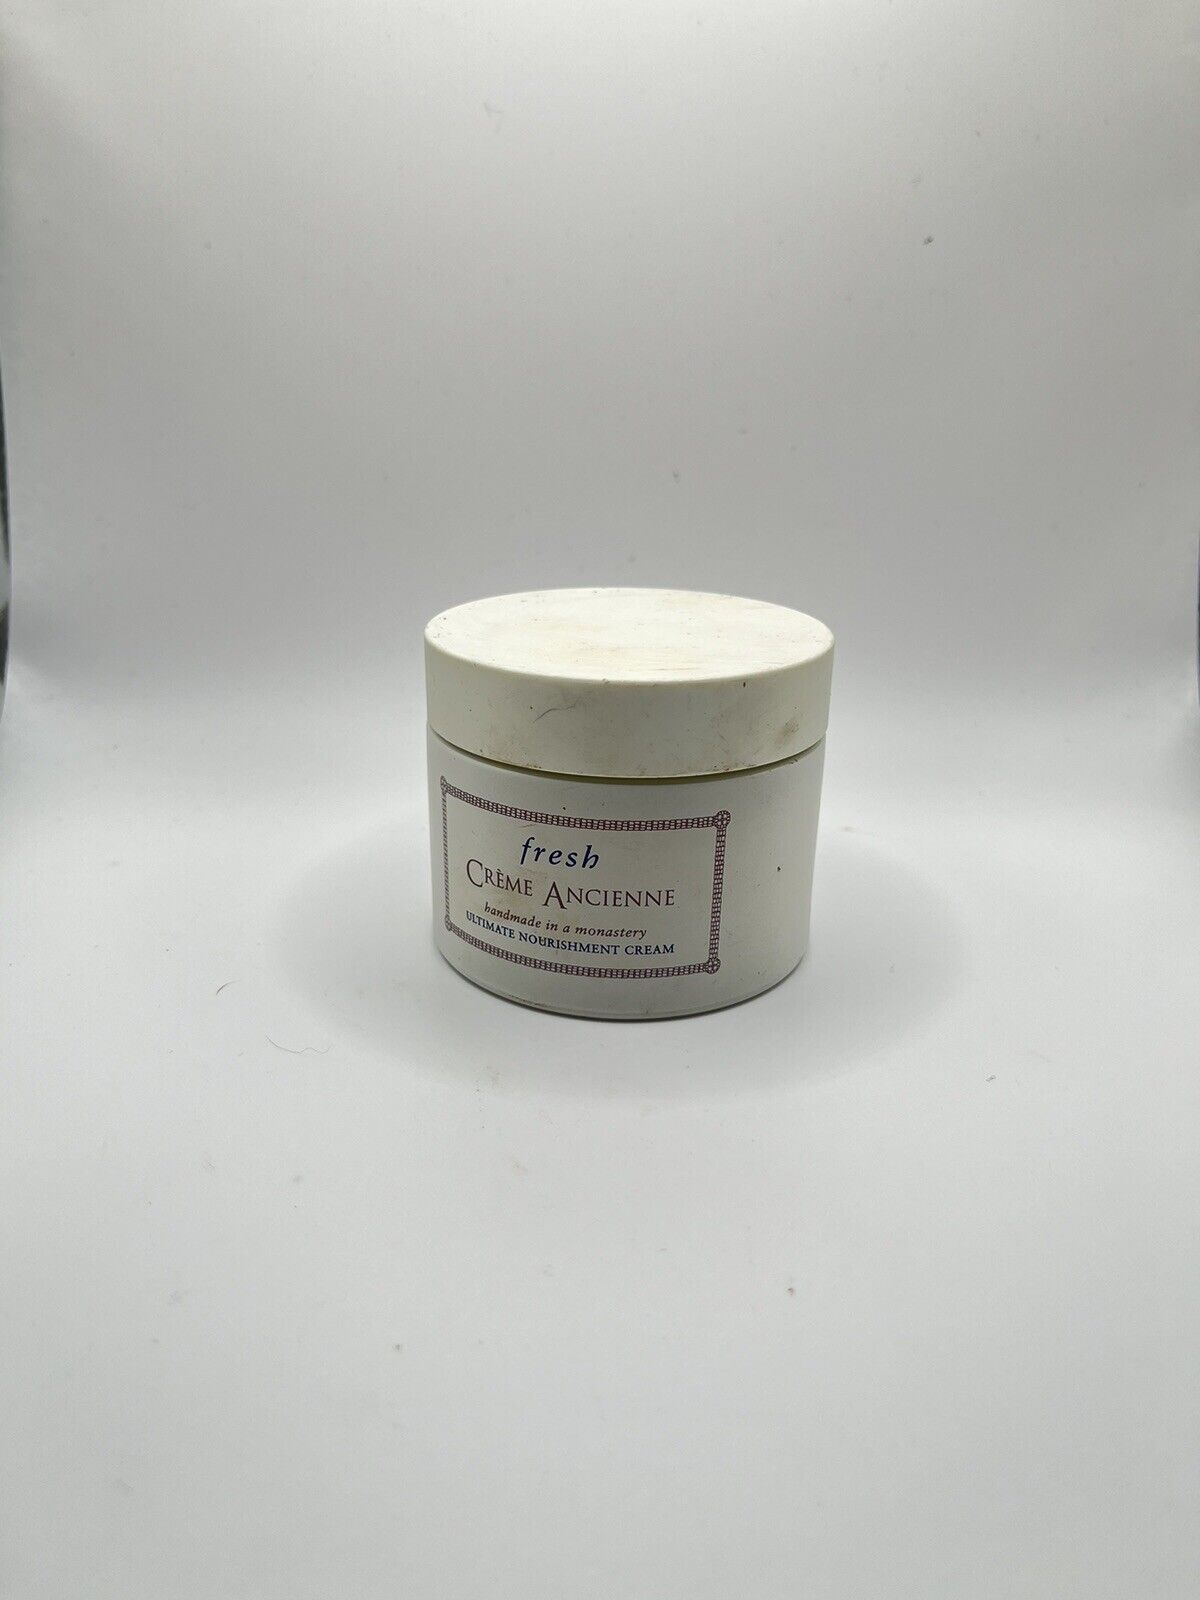 Fresh Creme Ancienne Ultimate Ageless Complexion Treatment 1oz (30g)- NWOB